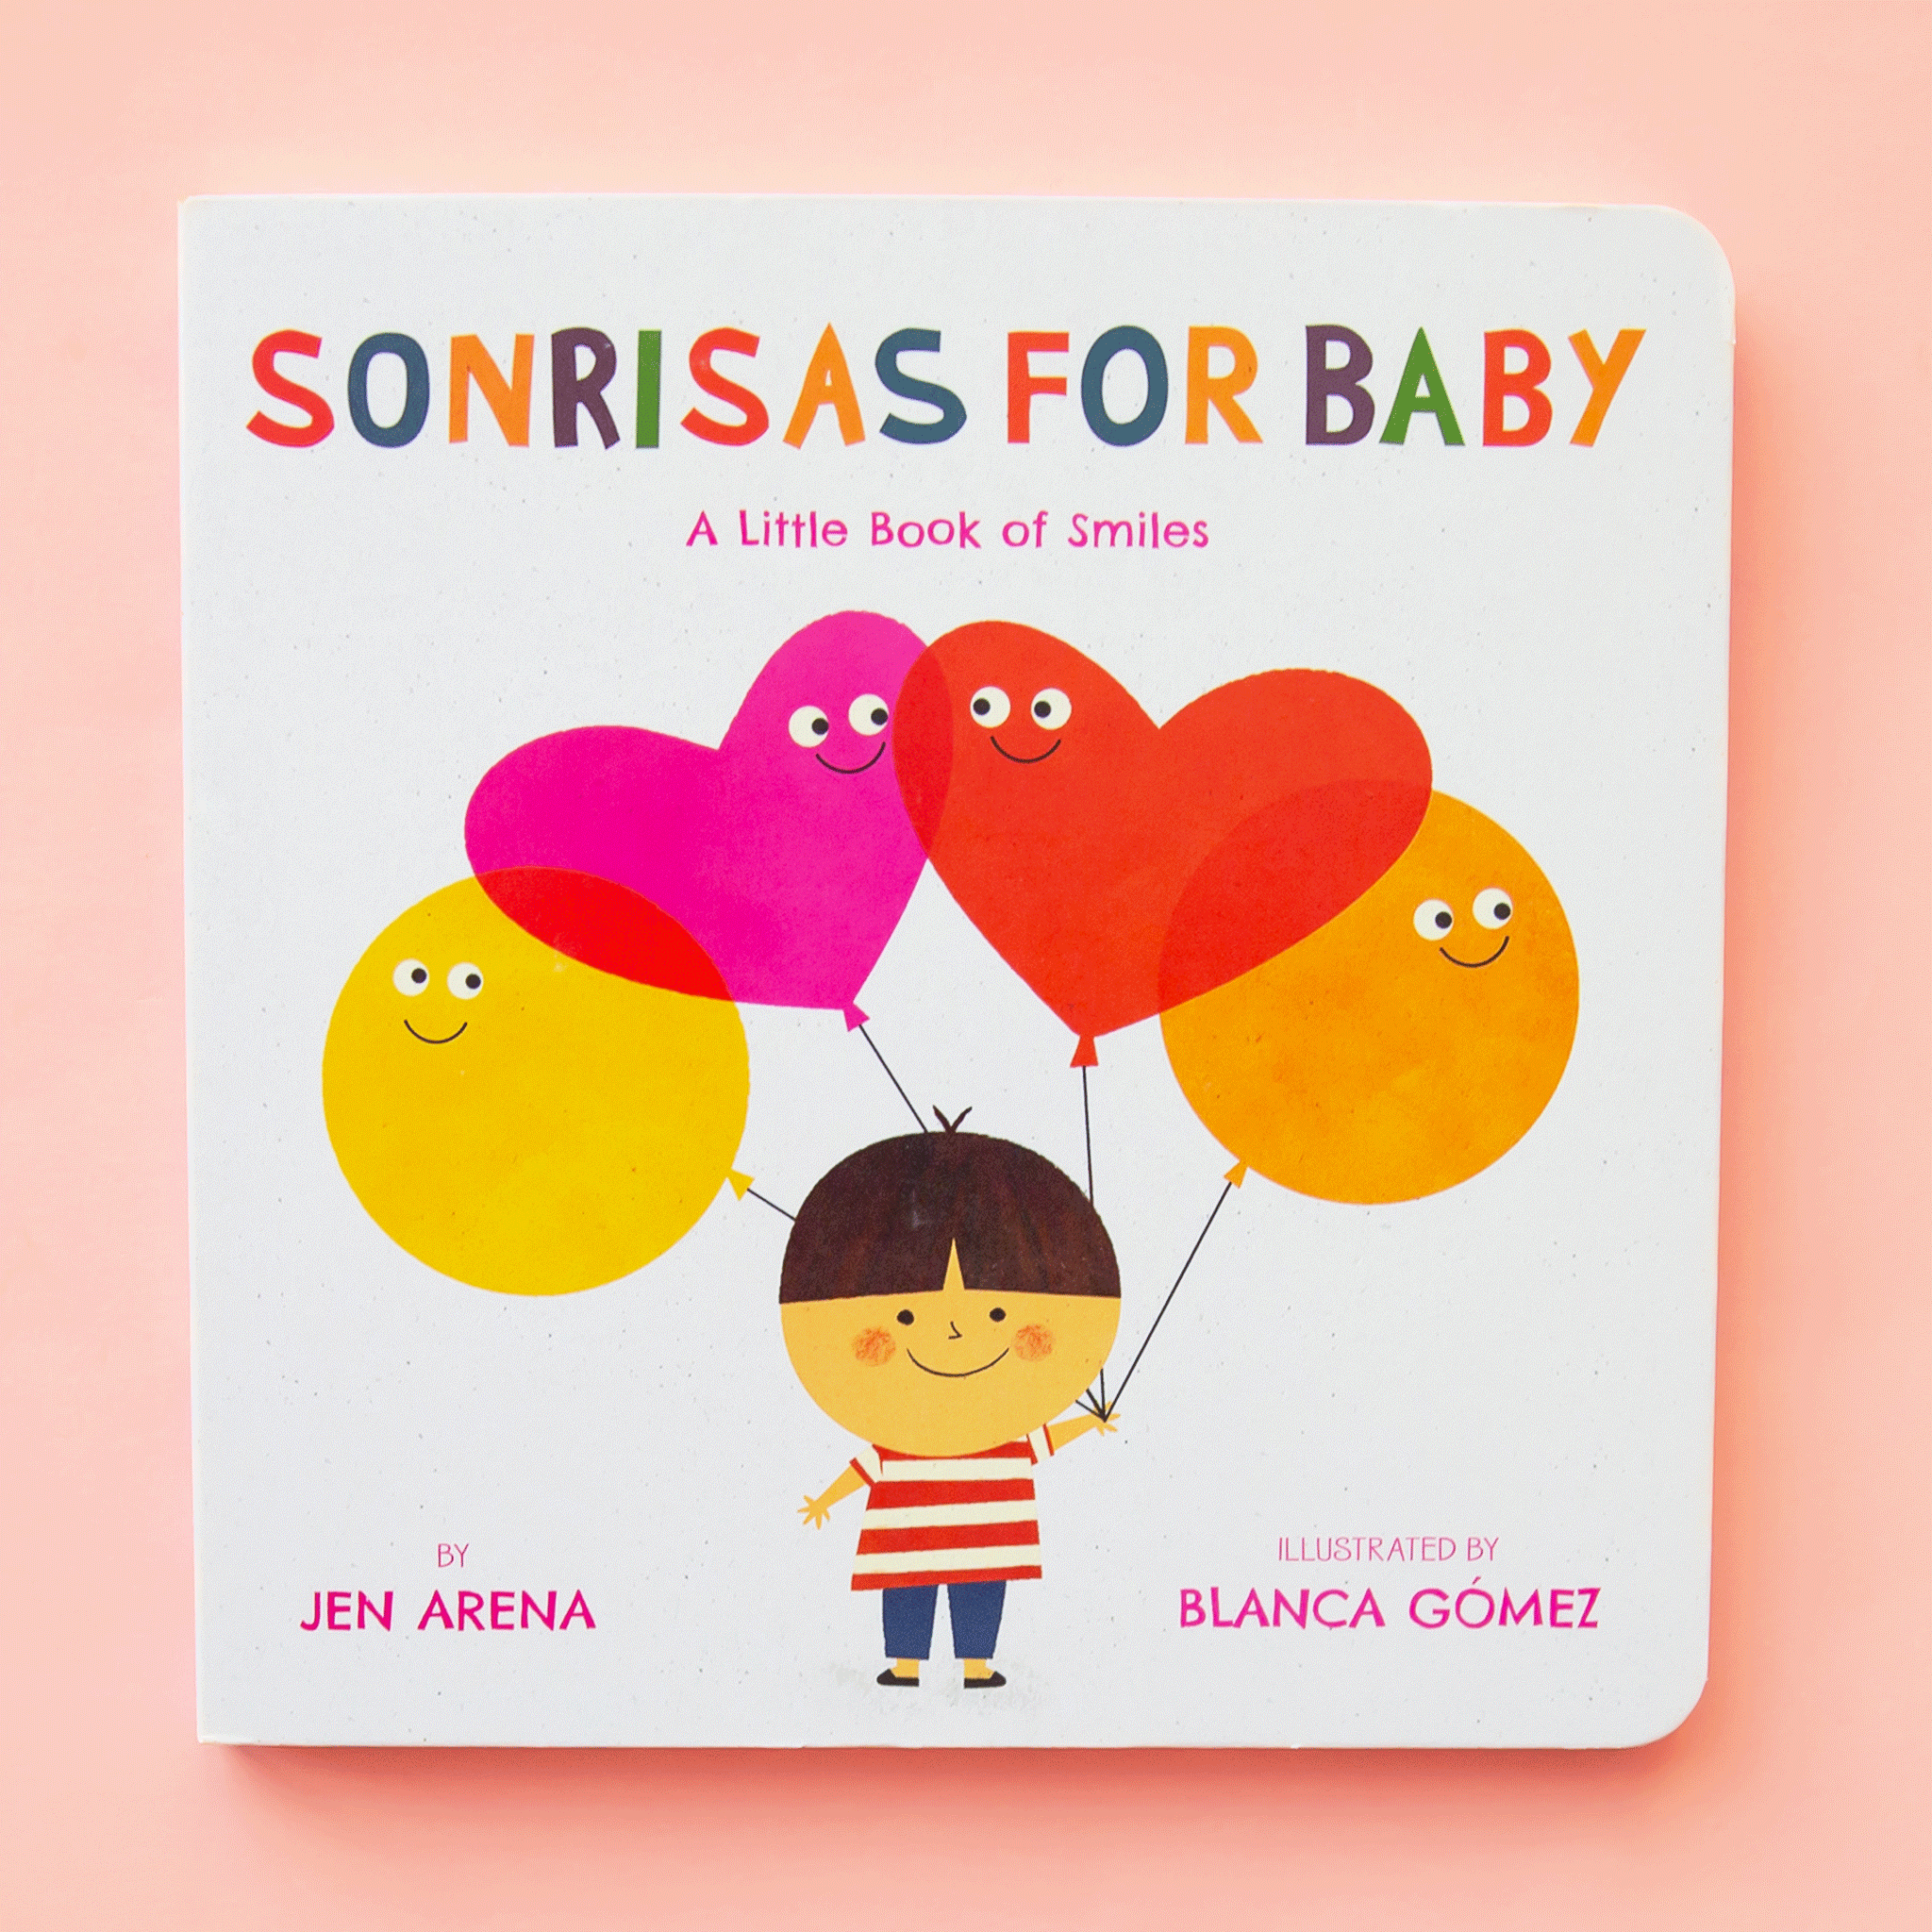 Cover of a white square book. In the middle is a drawing of a kid wearing a red and white striped t-shirt and blue pants. The kid has a large round head with brown hair and a smiley face. The child is holding four balloons. The left balloon is a yellow circle, the next is a pink heart, next is a red heart and the last balloon is an orange circle. All four balloons have a smiley face on them. At the top is rainbow text that reads ‘sonrisas for baby.’ Under is pink text that reads ‘a little book of smiles.'